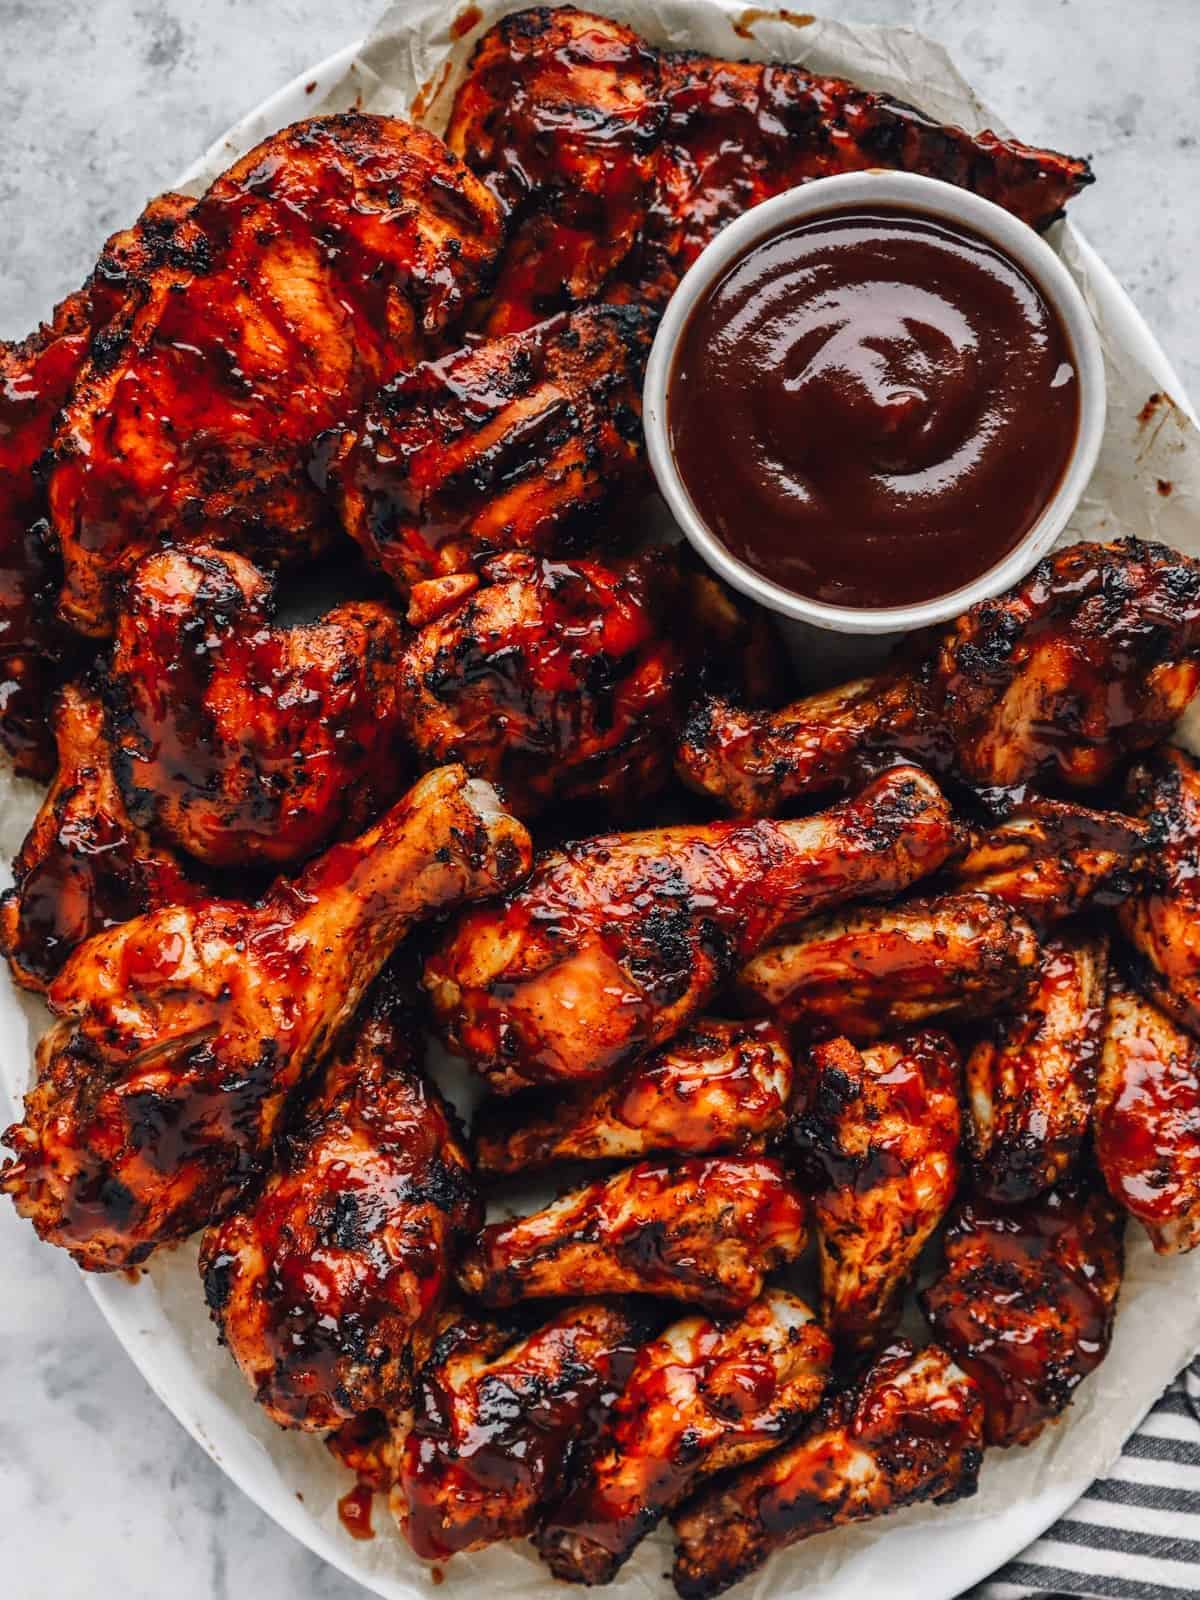 a plate of grilled BBQ chicken pieces, with a small bowl of BBQ sauce